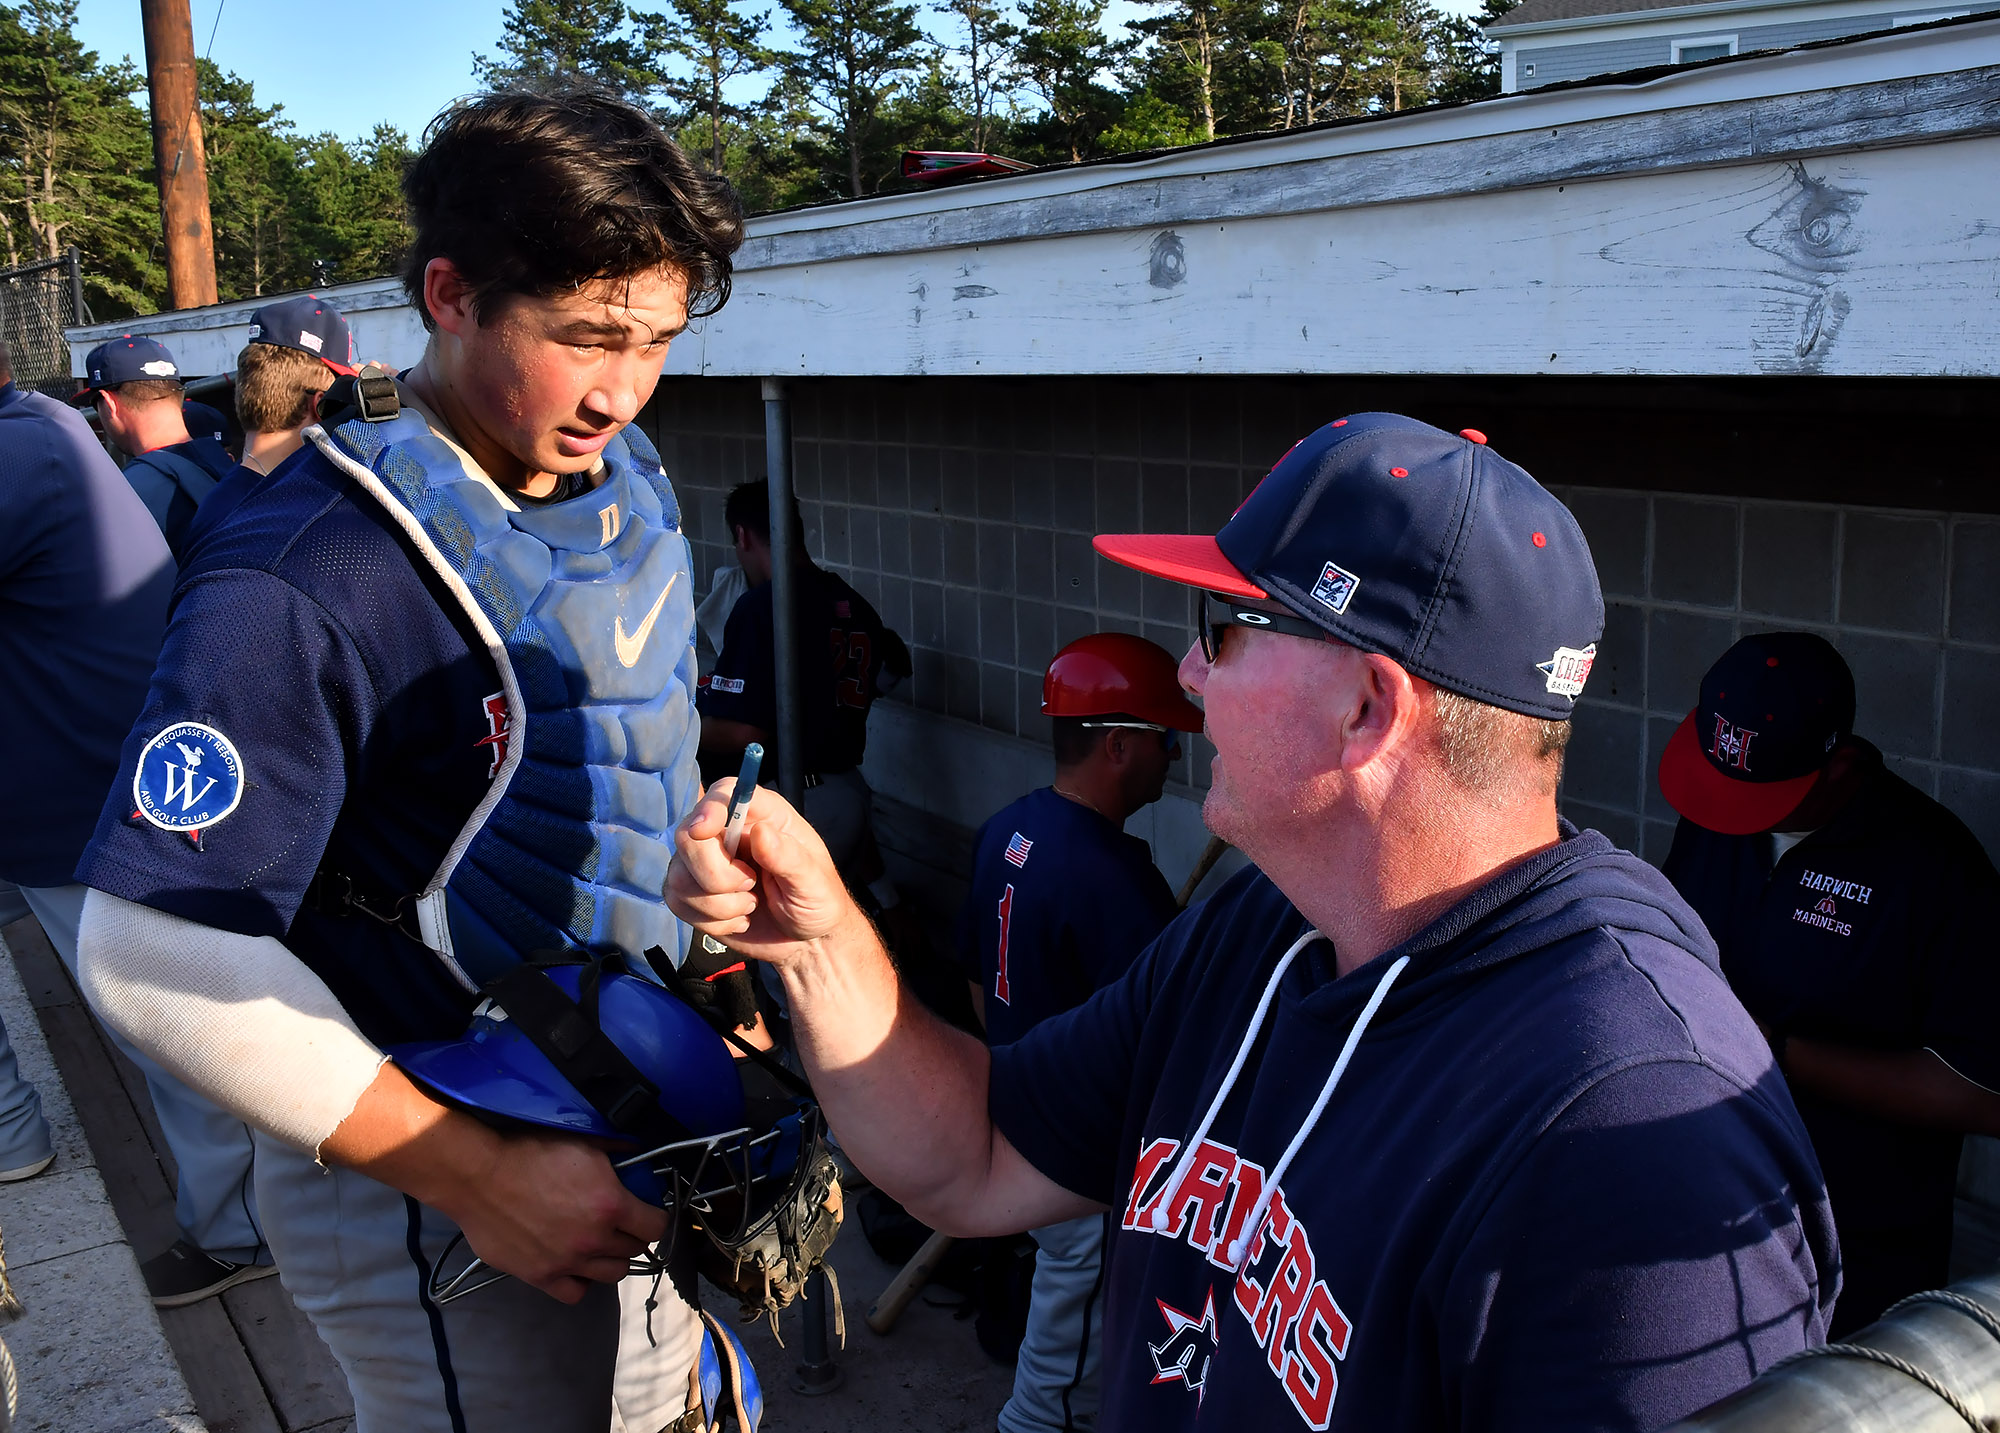 Steve Englert has been coaching in the Cape League for 20 years